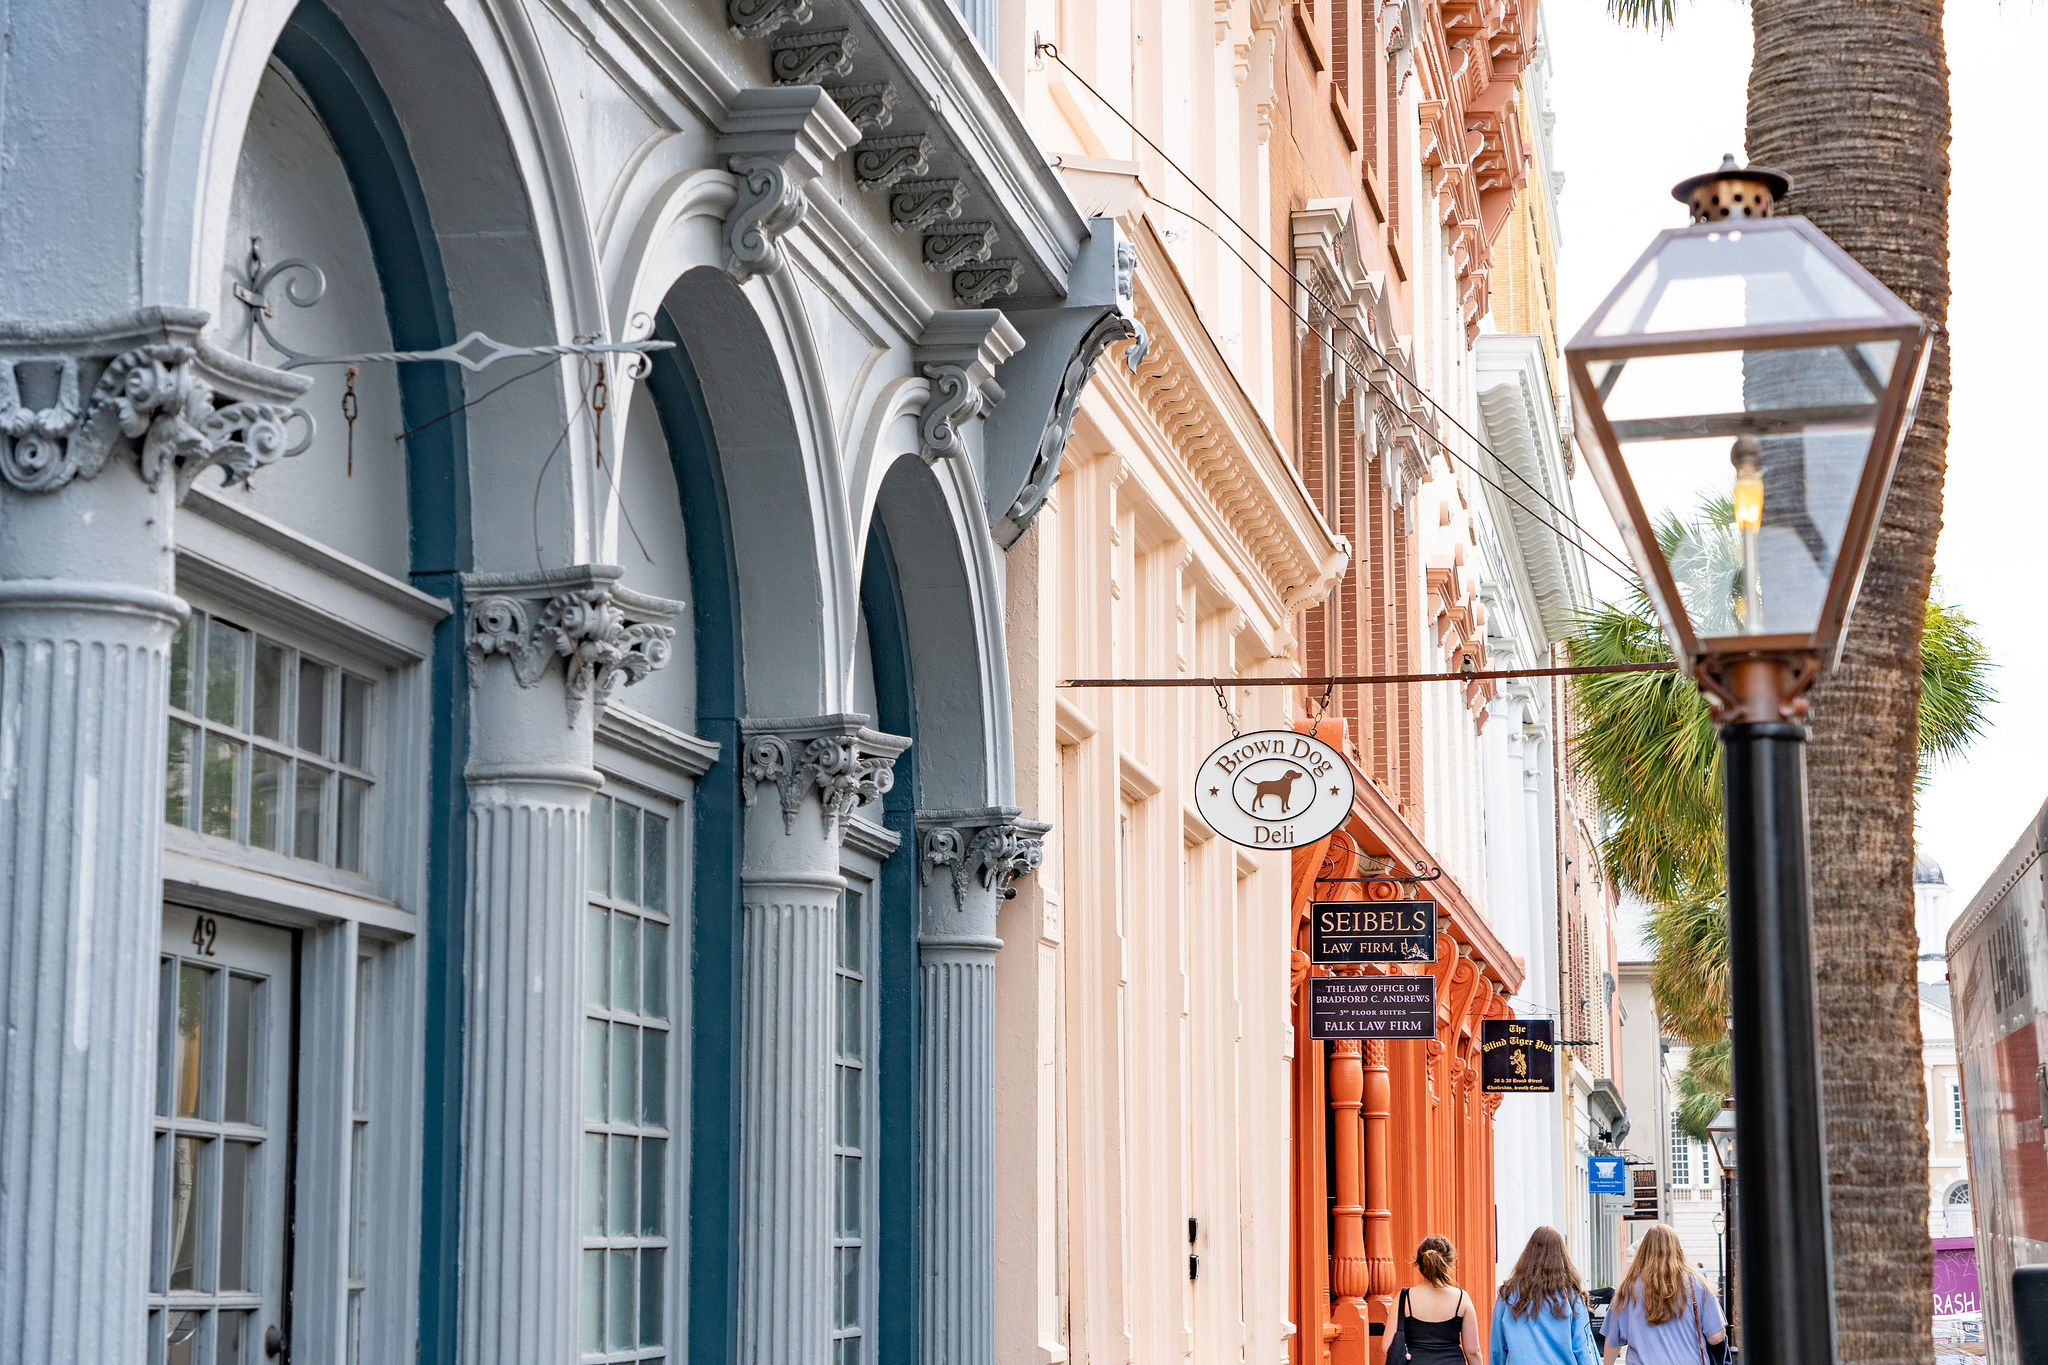 The restaurants and art galleries along Broad Street in downtown Charleston SC